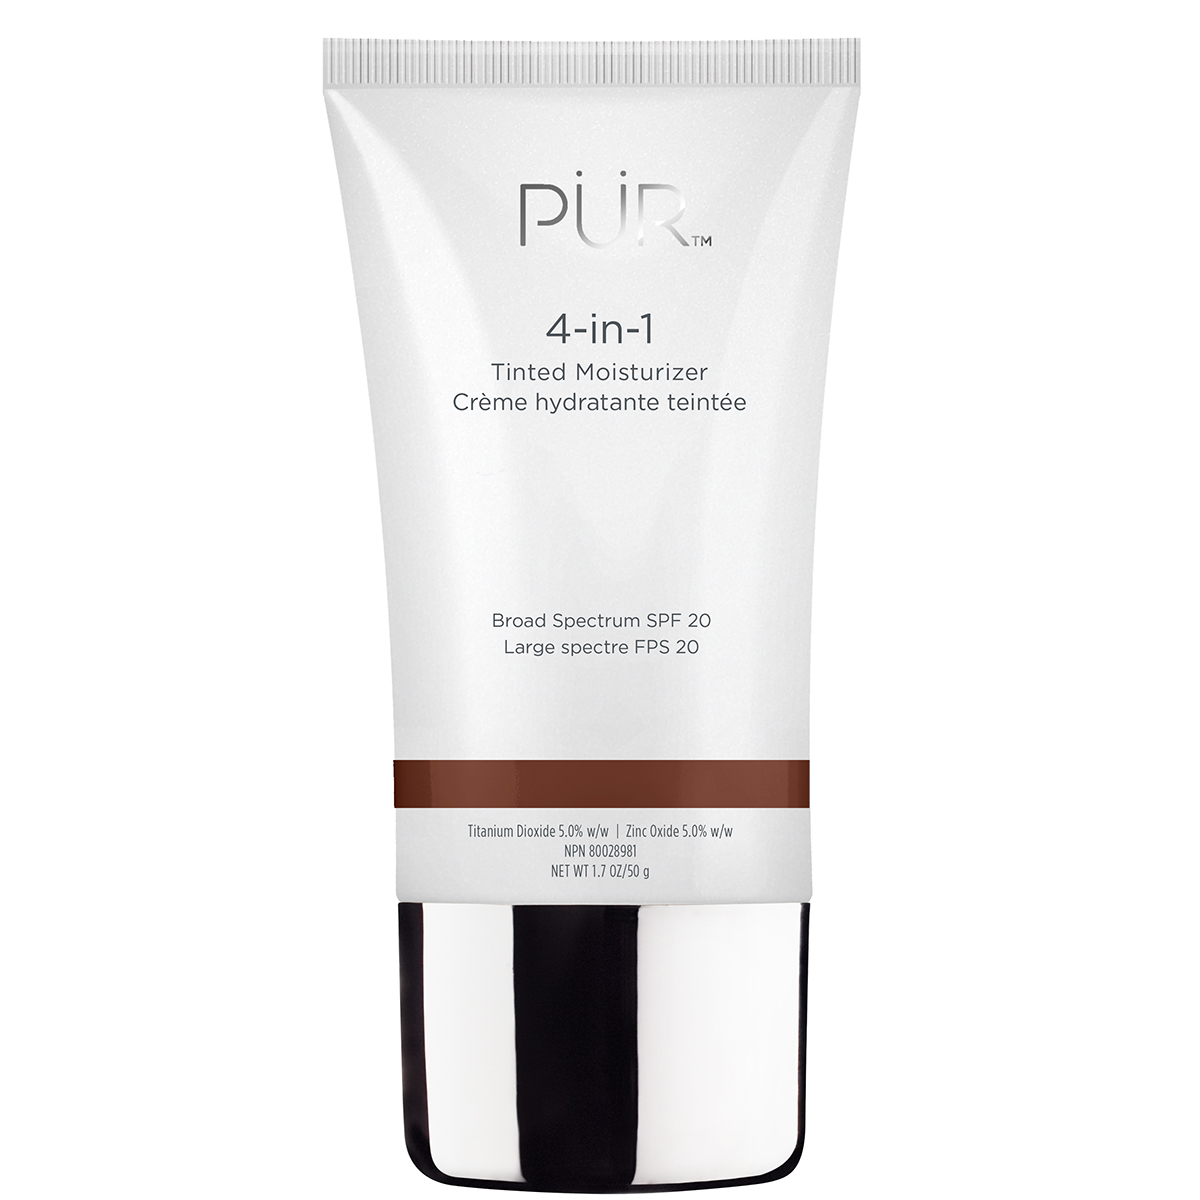 Pur 4-in-1 Mineral Tinted Moisturizer DPP4